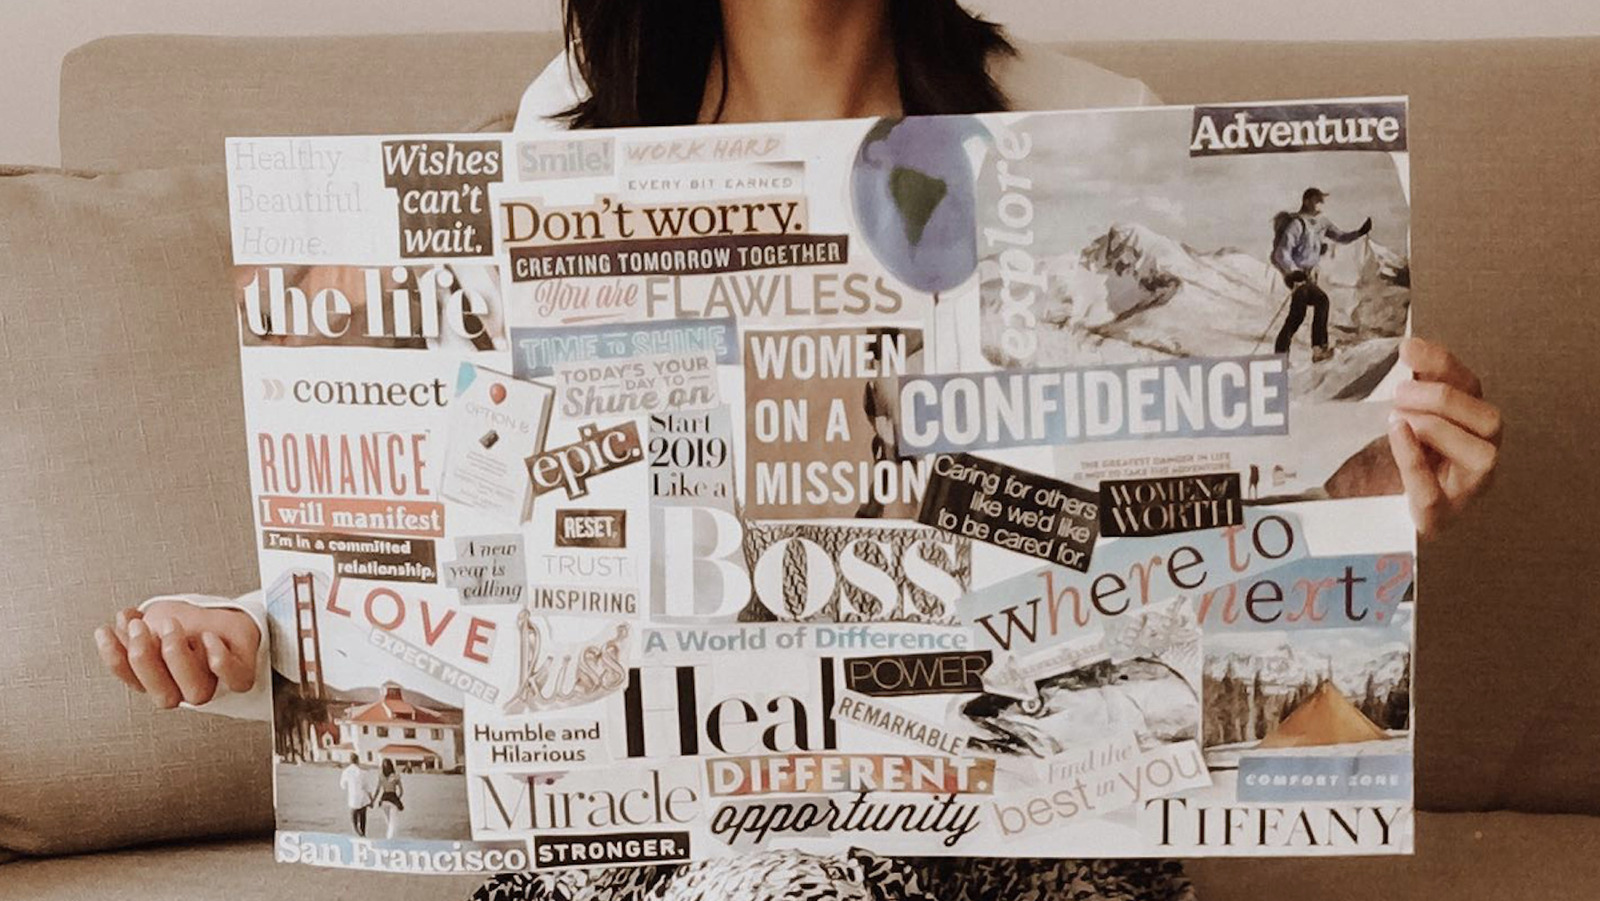 Create an efficient Vision Board to manifest your goals